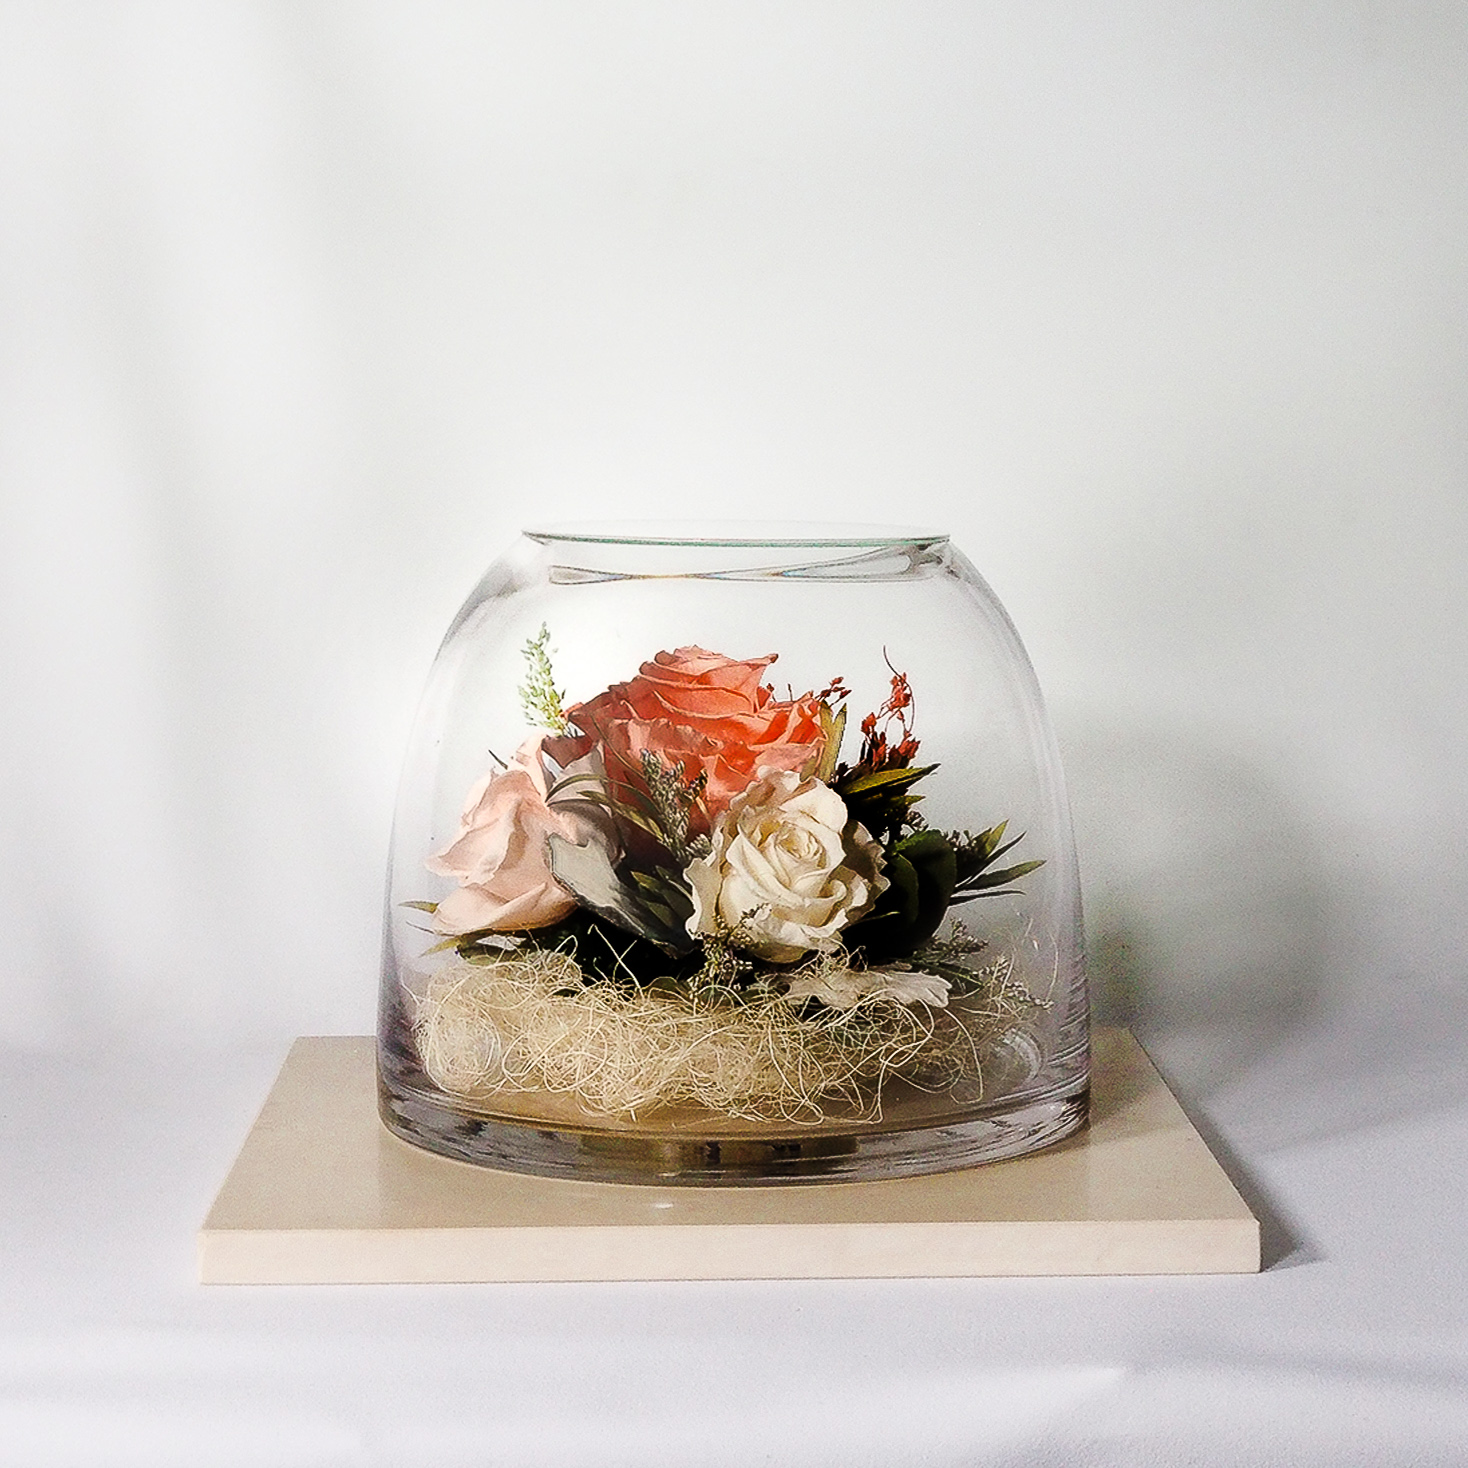 Preserved Flower Imported From Japan (Peach-Ivery White-Pink Champagne)(67174). For Valentines, Gift, Home Decoration, Anniversary and present for your love ones. 100% natural flower.